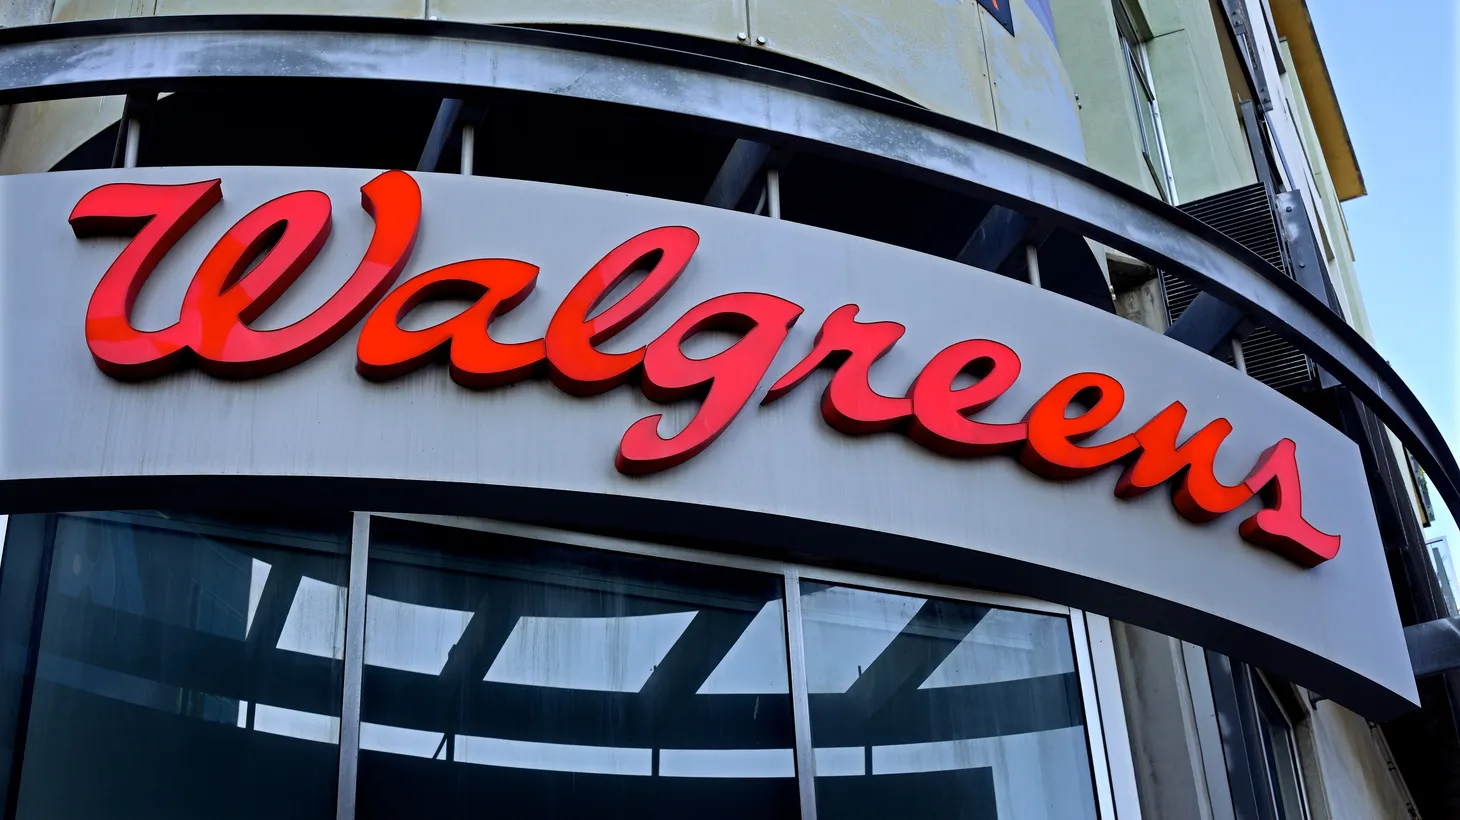 A Walgreens drugstore sign is seen in Hollywood, CA. Walgreens’ move to preemptively ban the sales of mifepristone in many areas is a response to Republican lawmakers who threatened legal action against the company, says Politico reporter Alice Miranda Ollstein.